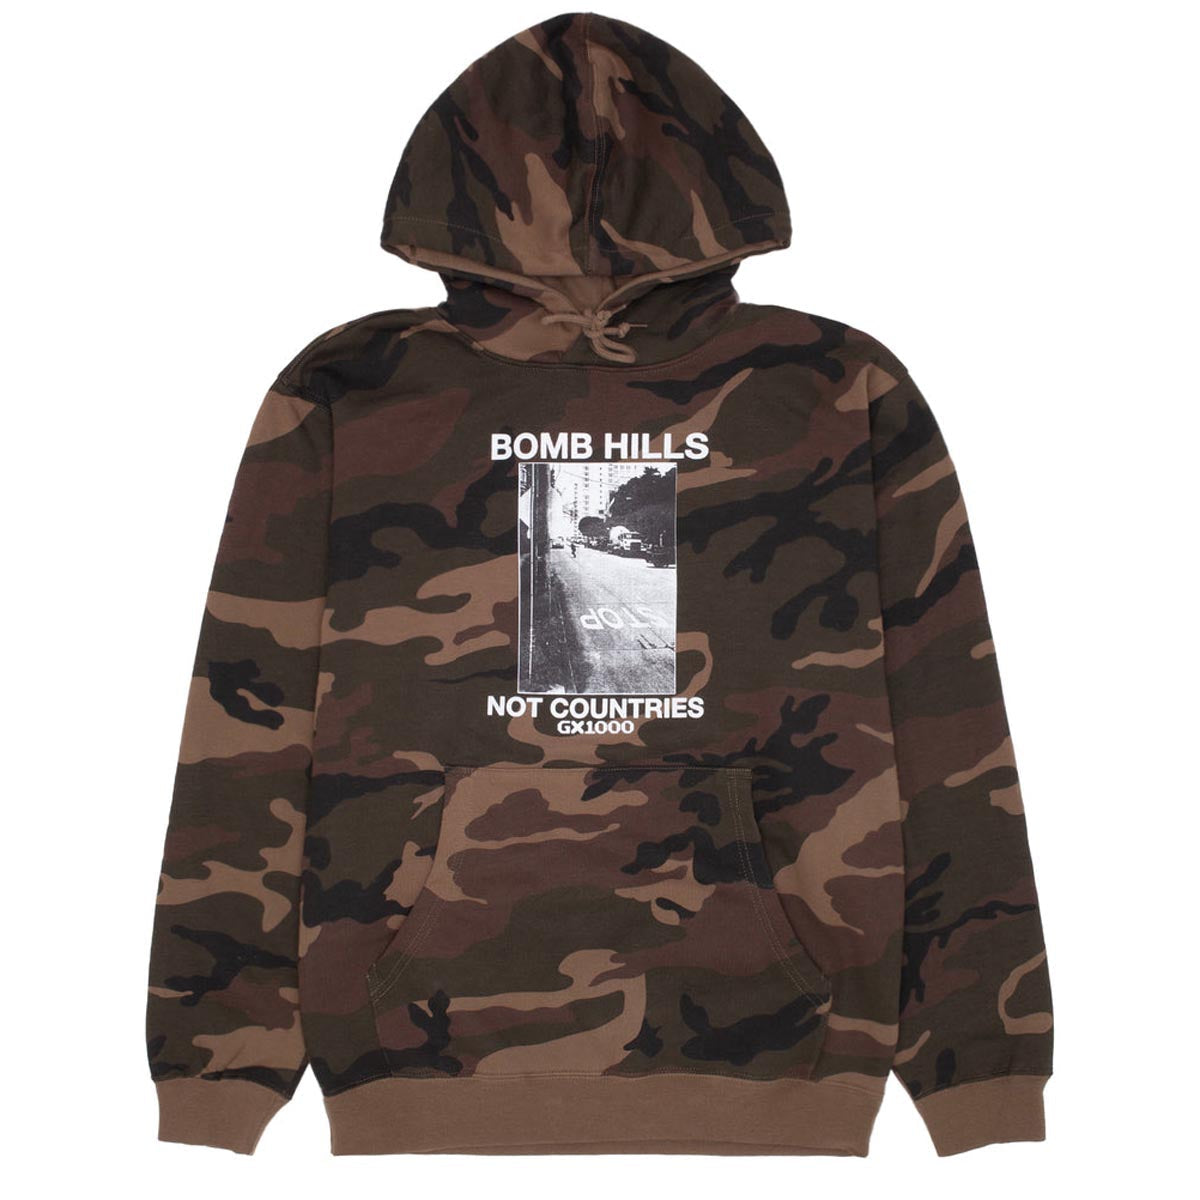 GX1000 Bomb Hills Not Countries Hoodie - Camo image 1